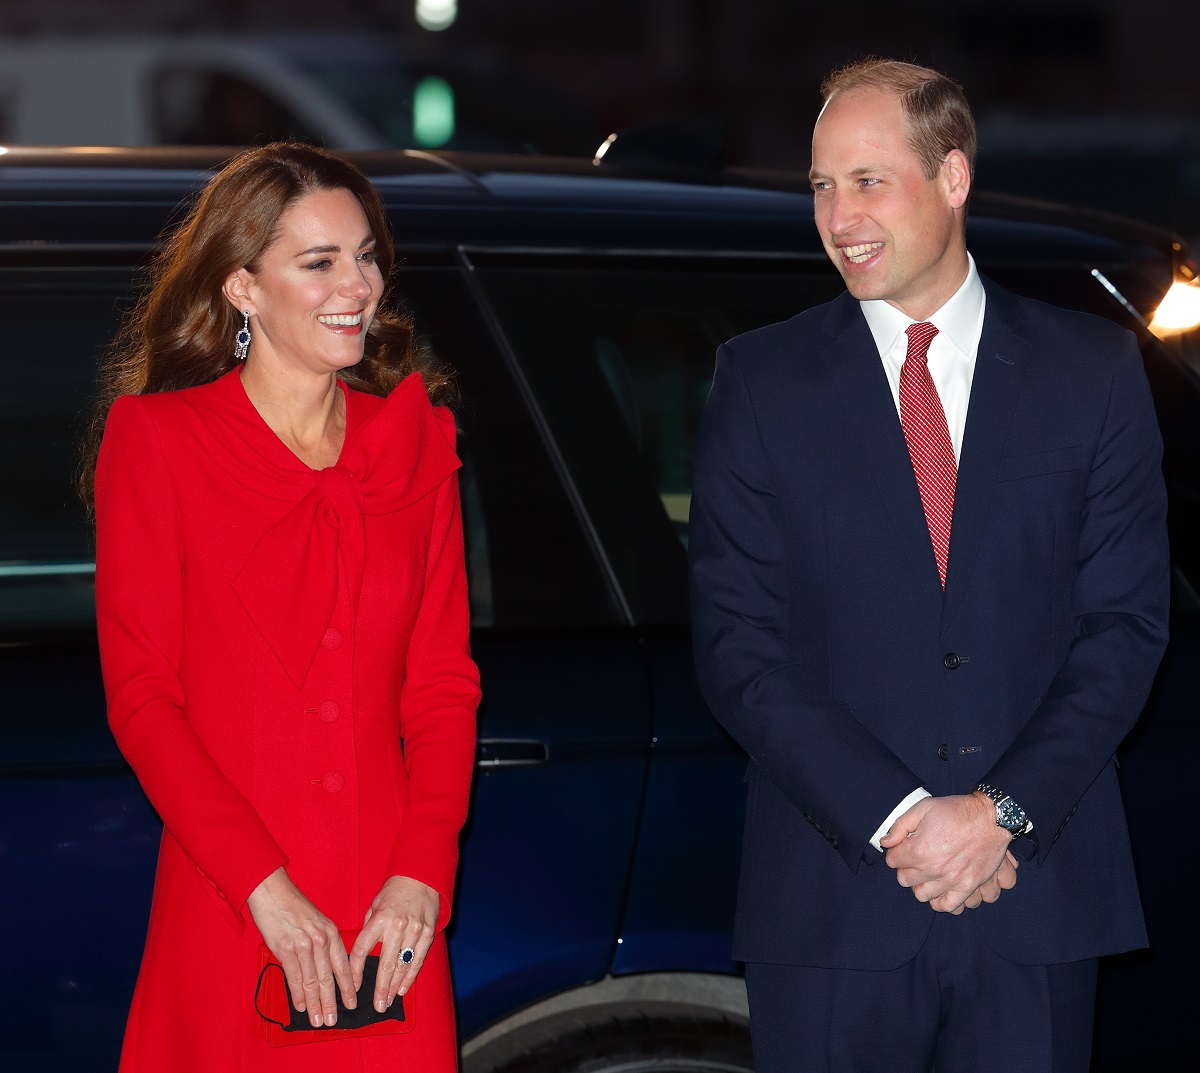 Kate Middleton and Prince William smiling as they arrive at the Together at Christmas community carol service